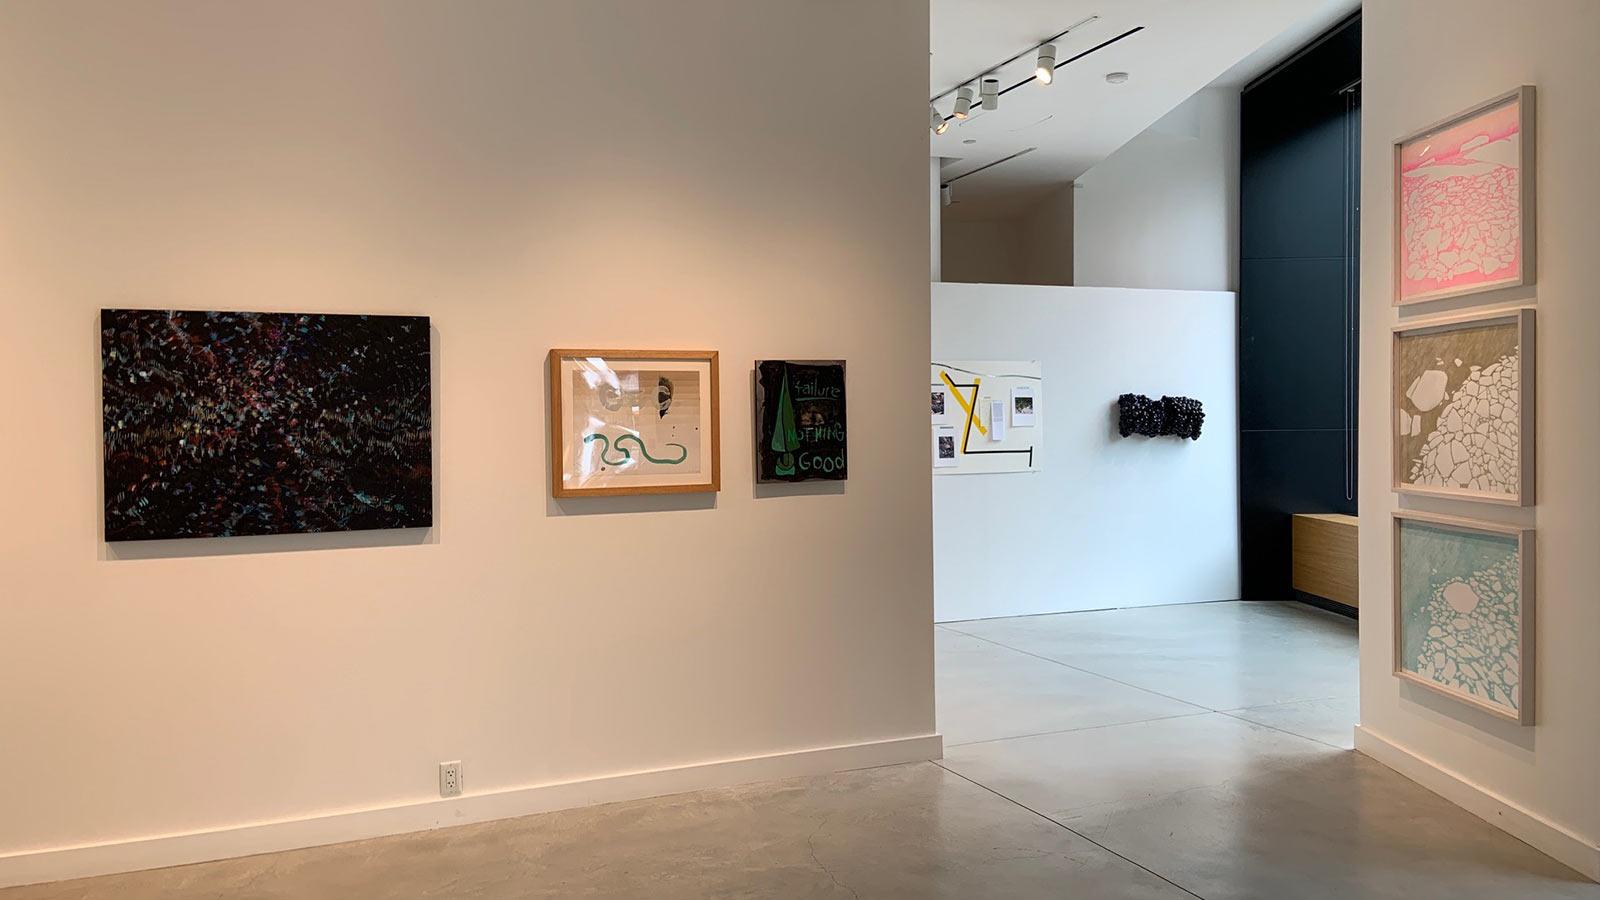 Fall 2020 Art Faculty Exhibition in the gallery